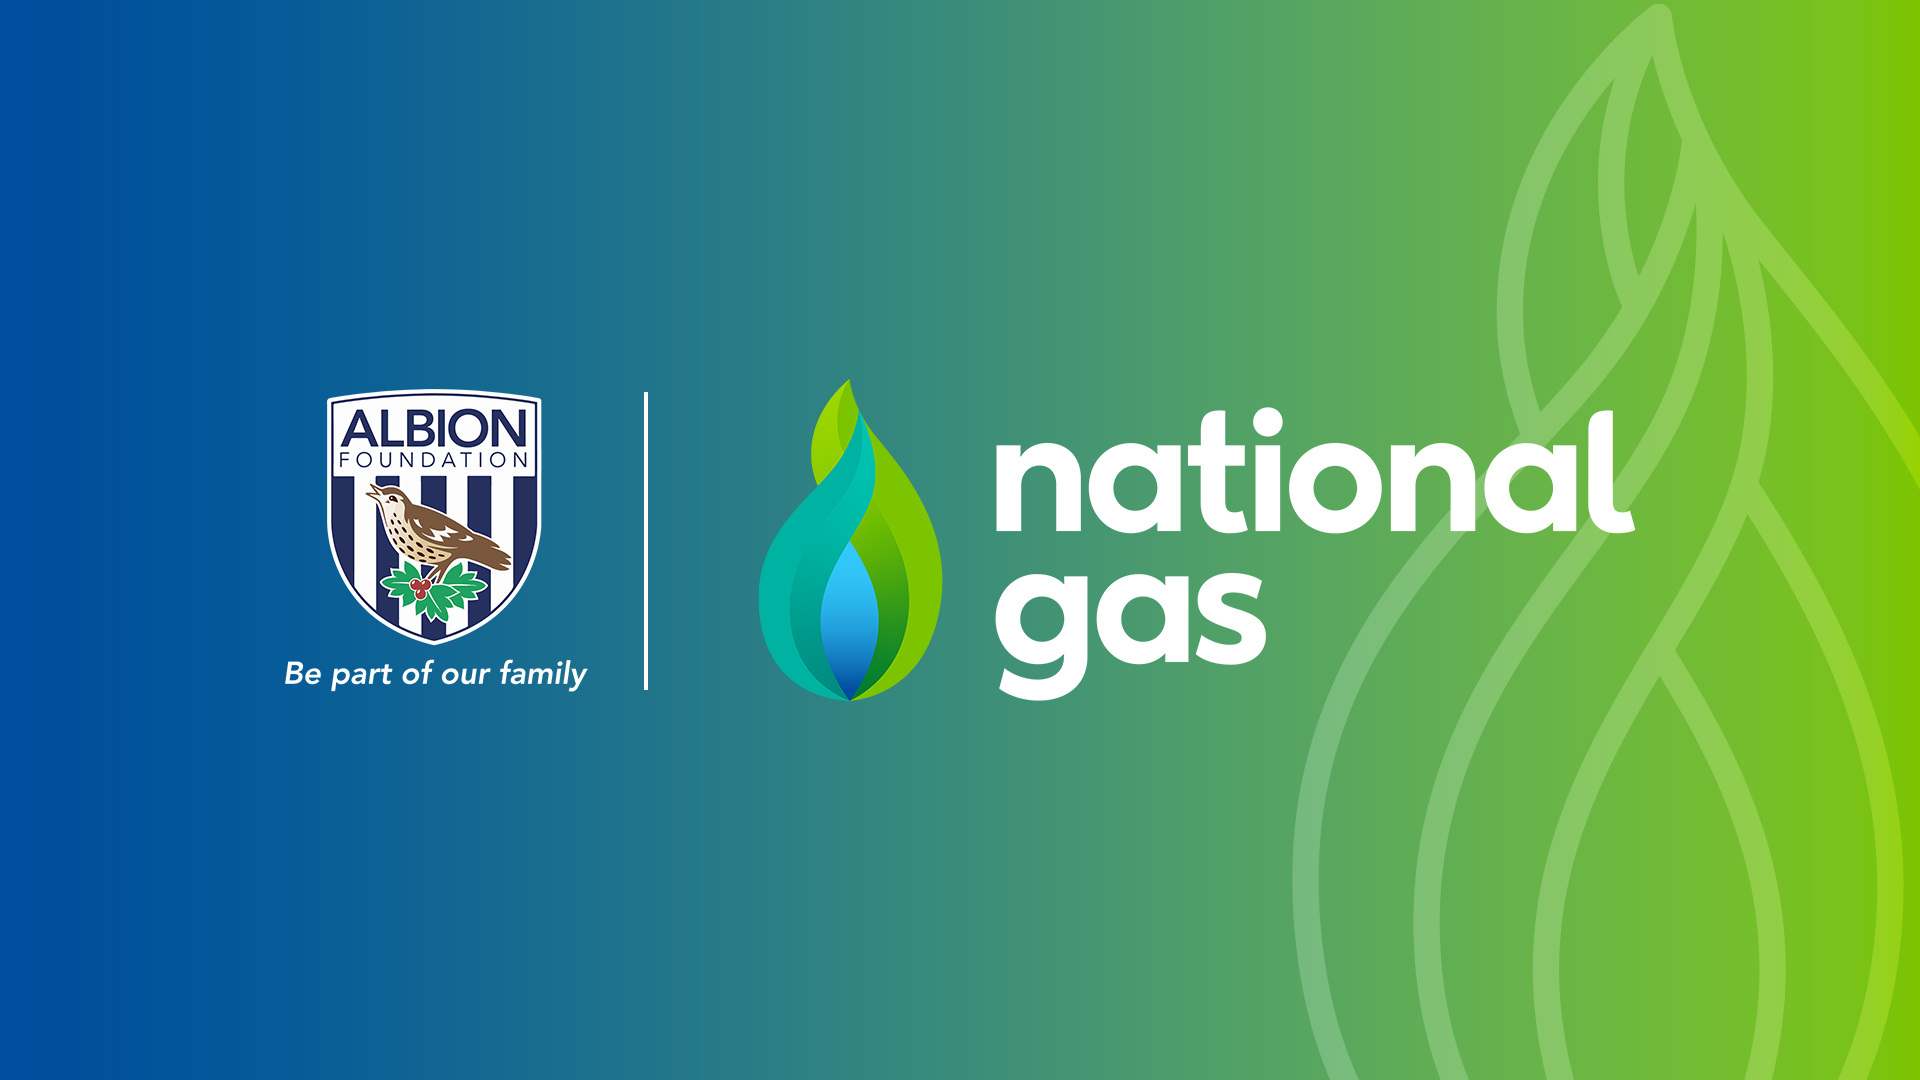 The Albion Foundation logo alongside the National Gas logo with National Gas branding